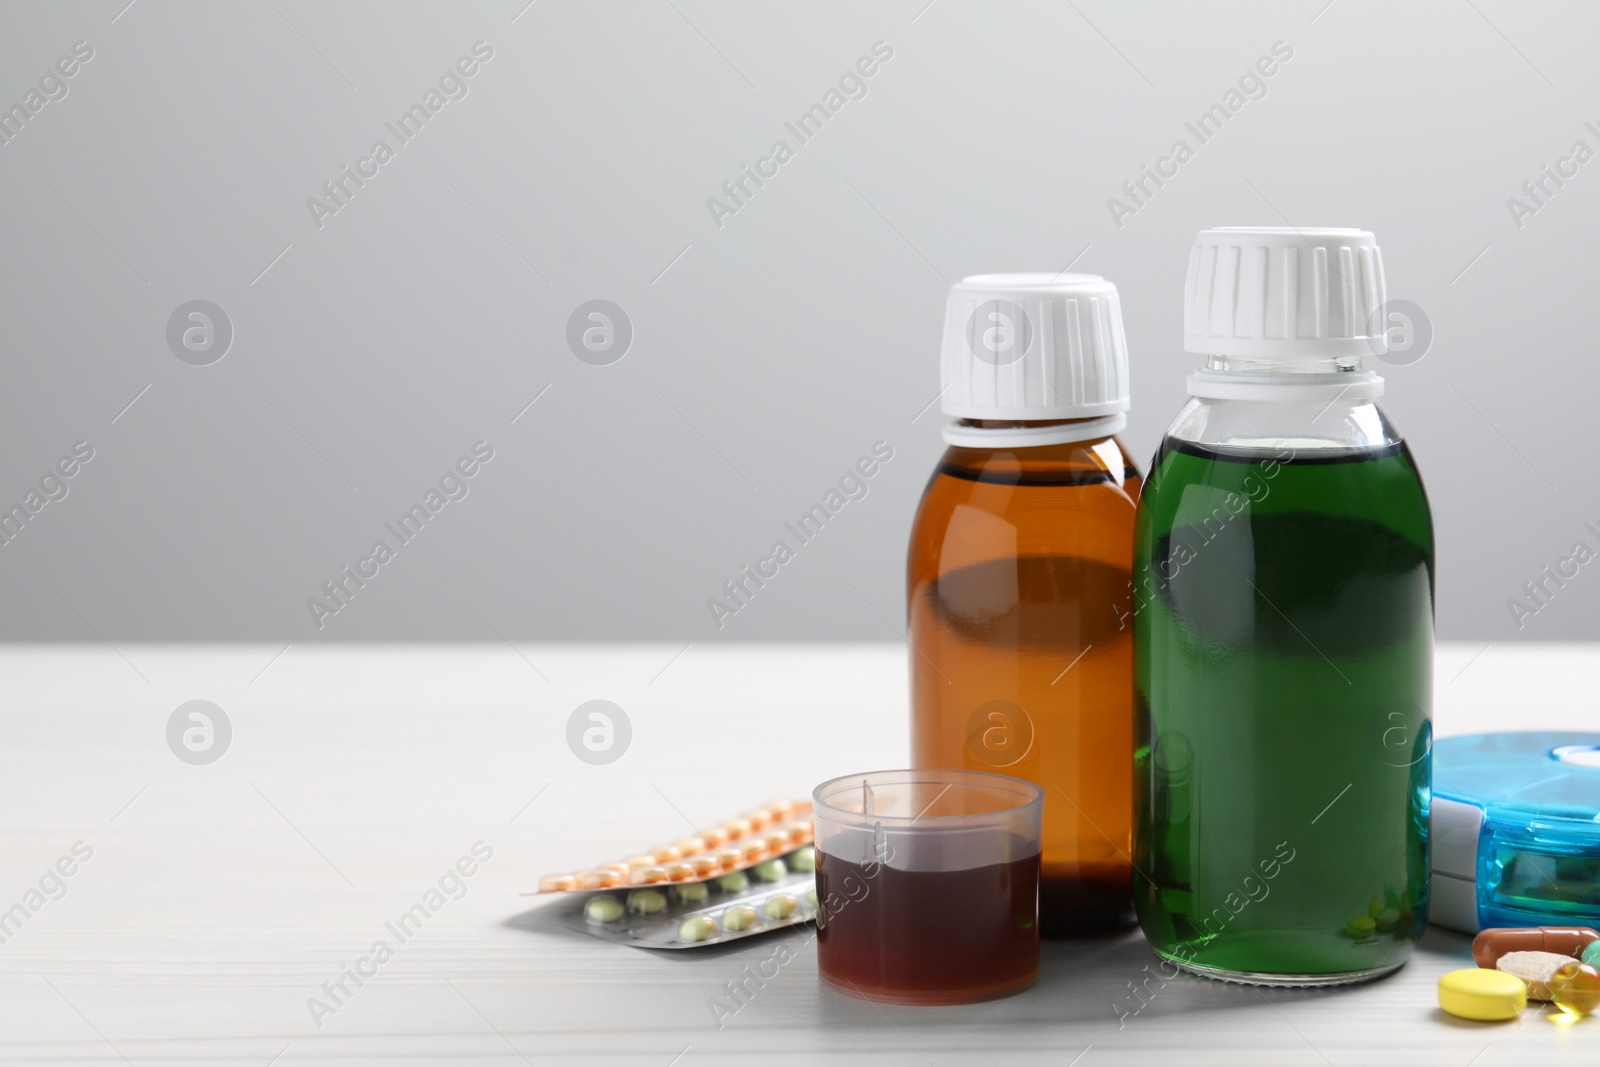 Photo of Bottles of syrup, measuring cup and pills on white table against light grey background, space for text. Cold medicine